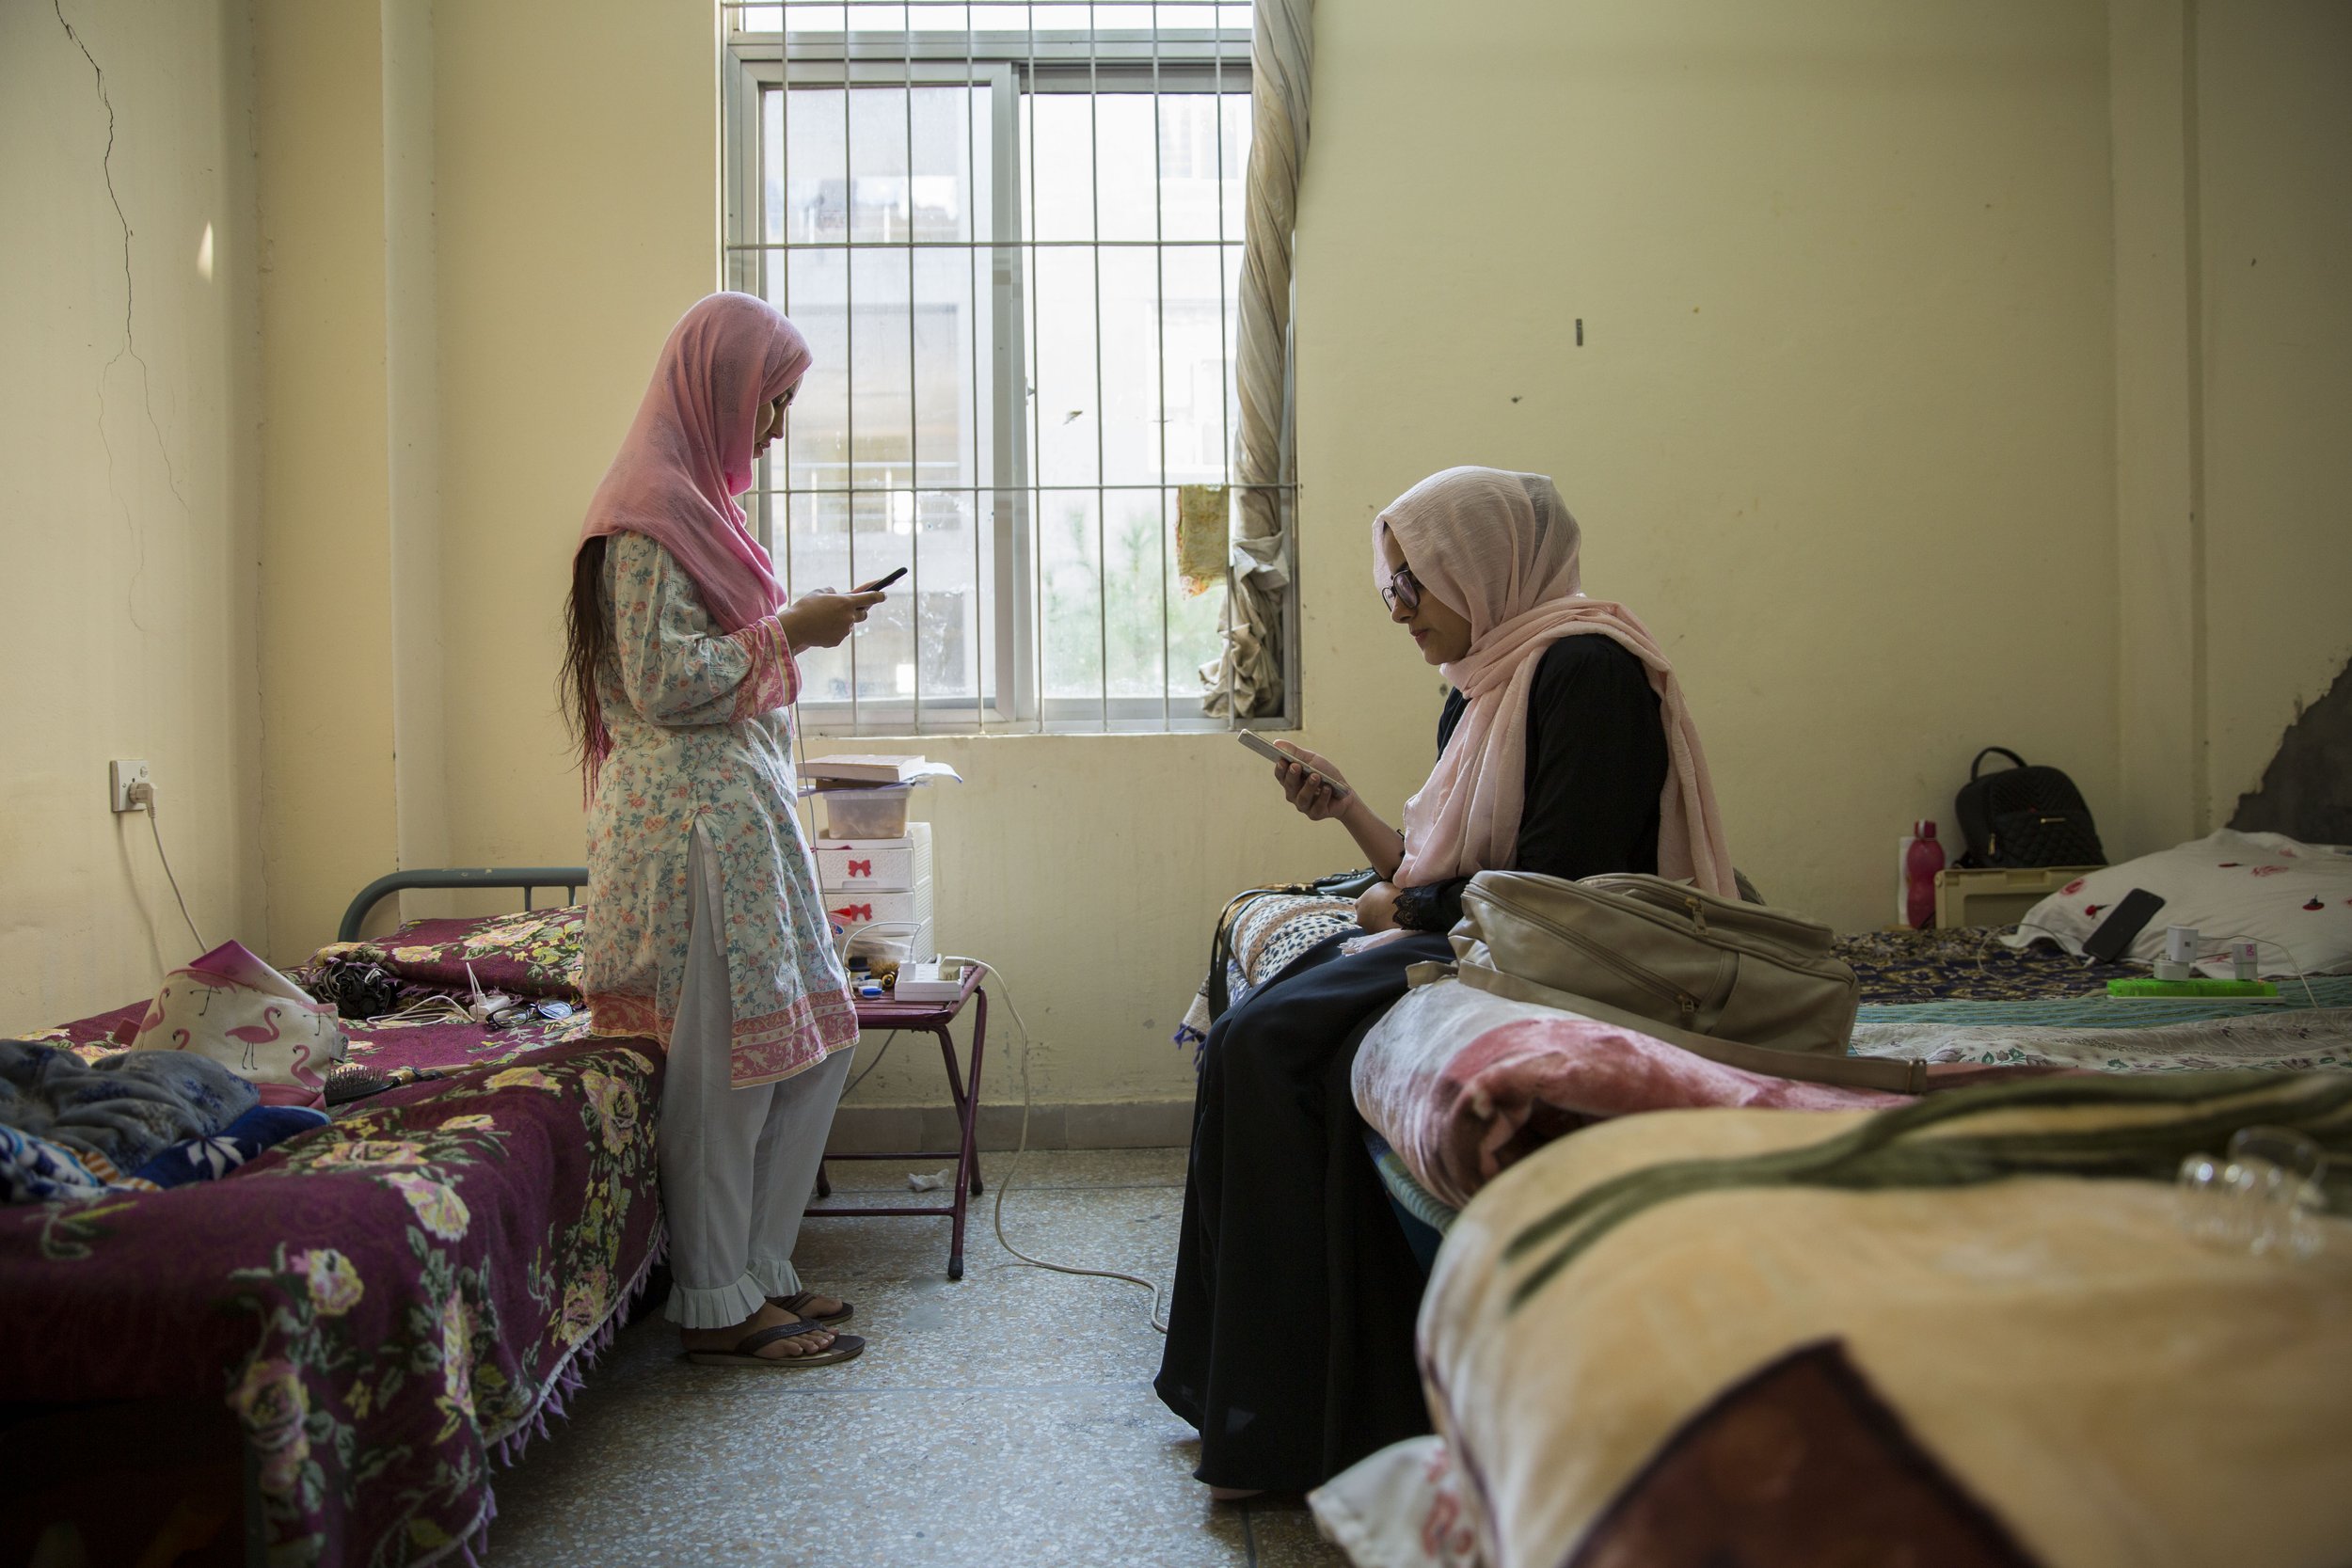  Bibi and her roommate, Sana Arif, hang out in their dorm before class. 